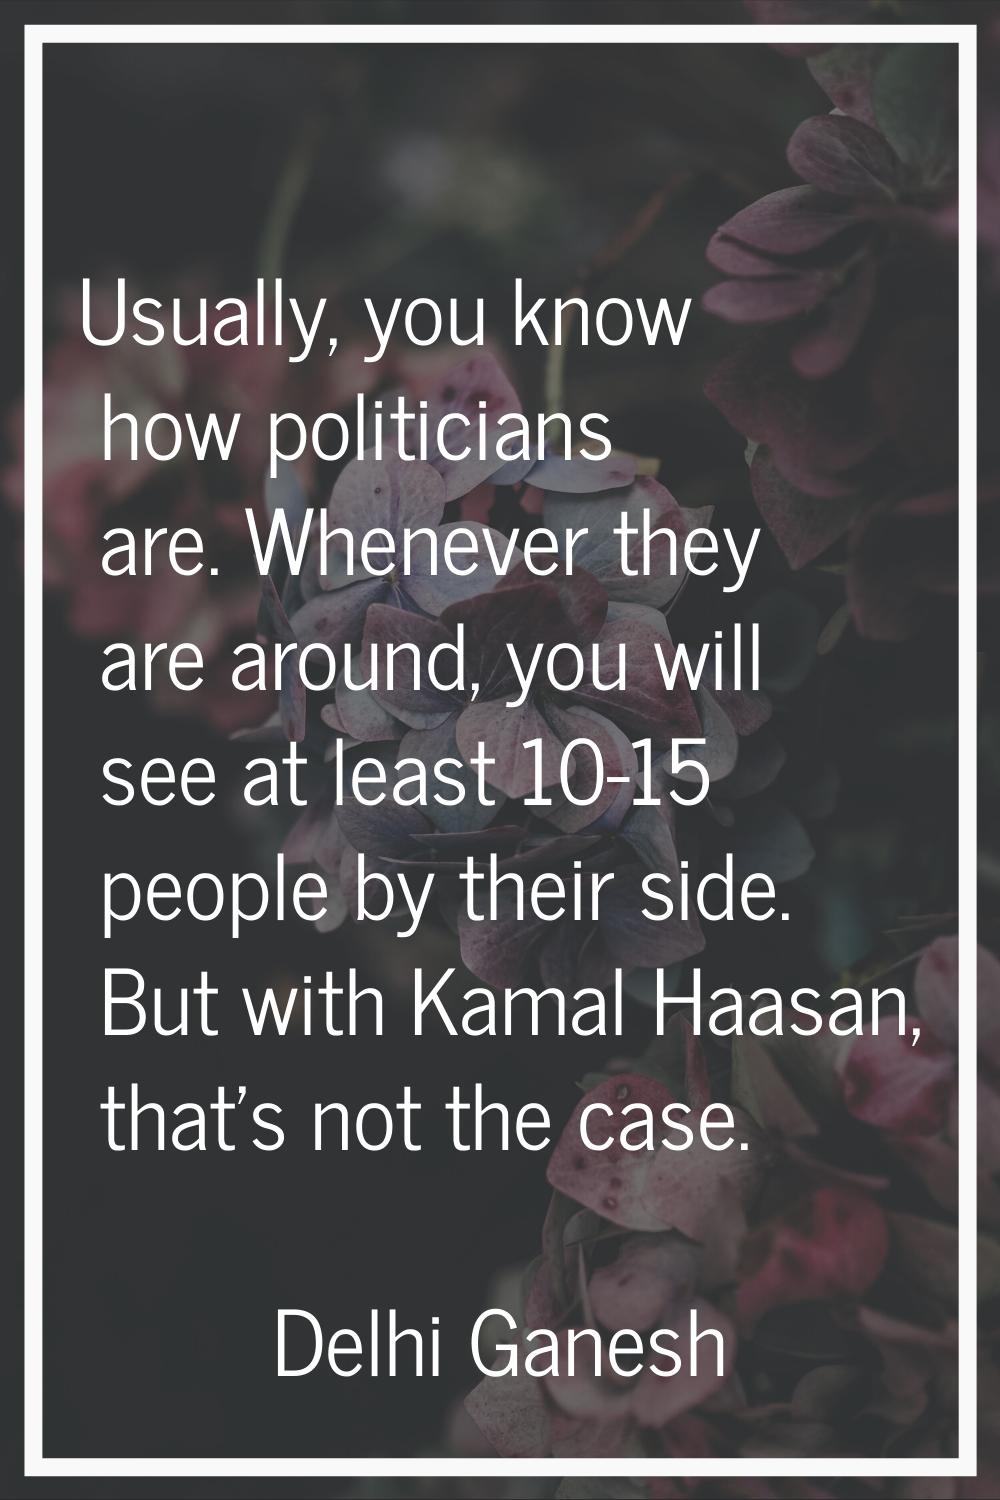 Usually, you know how politicians are. Whenever they are around, you will see at least 10-15 people